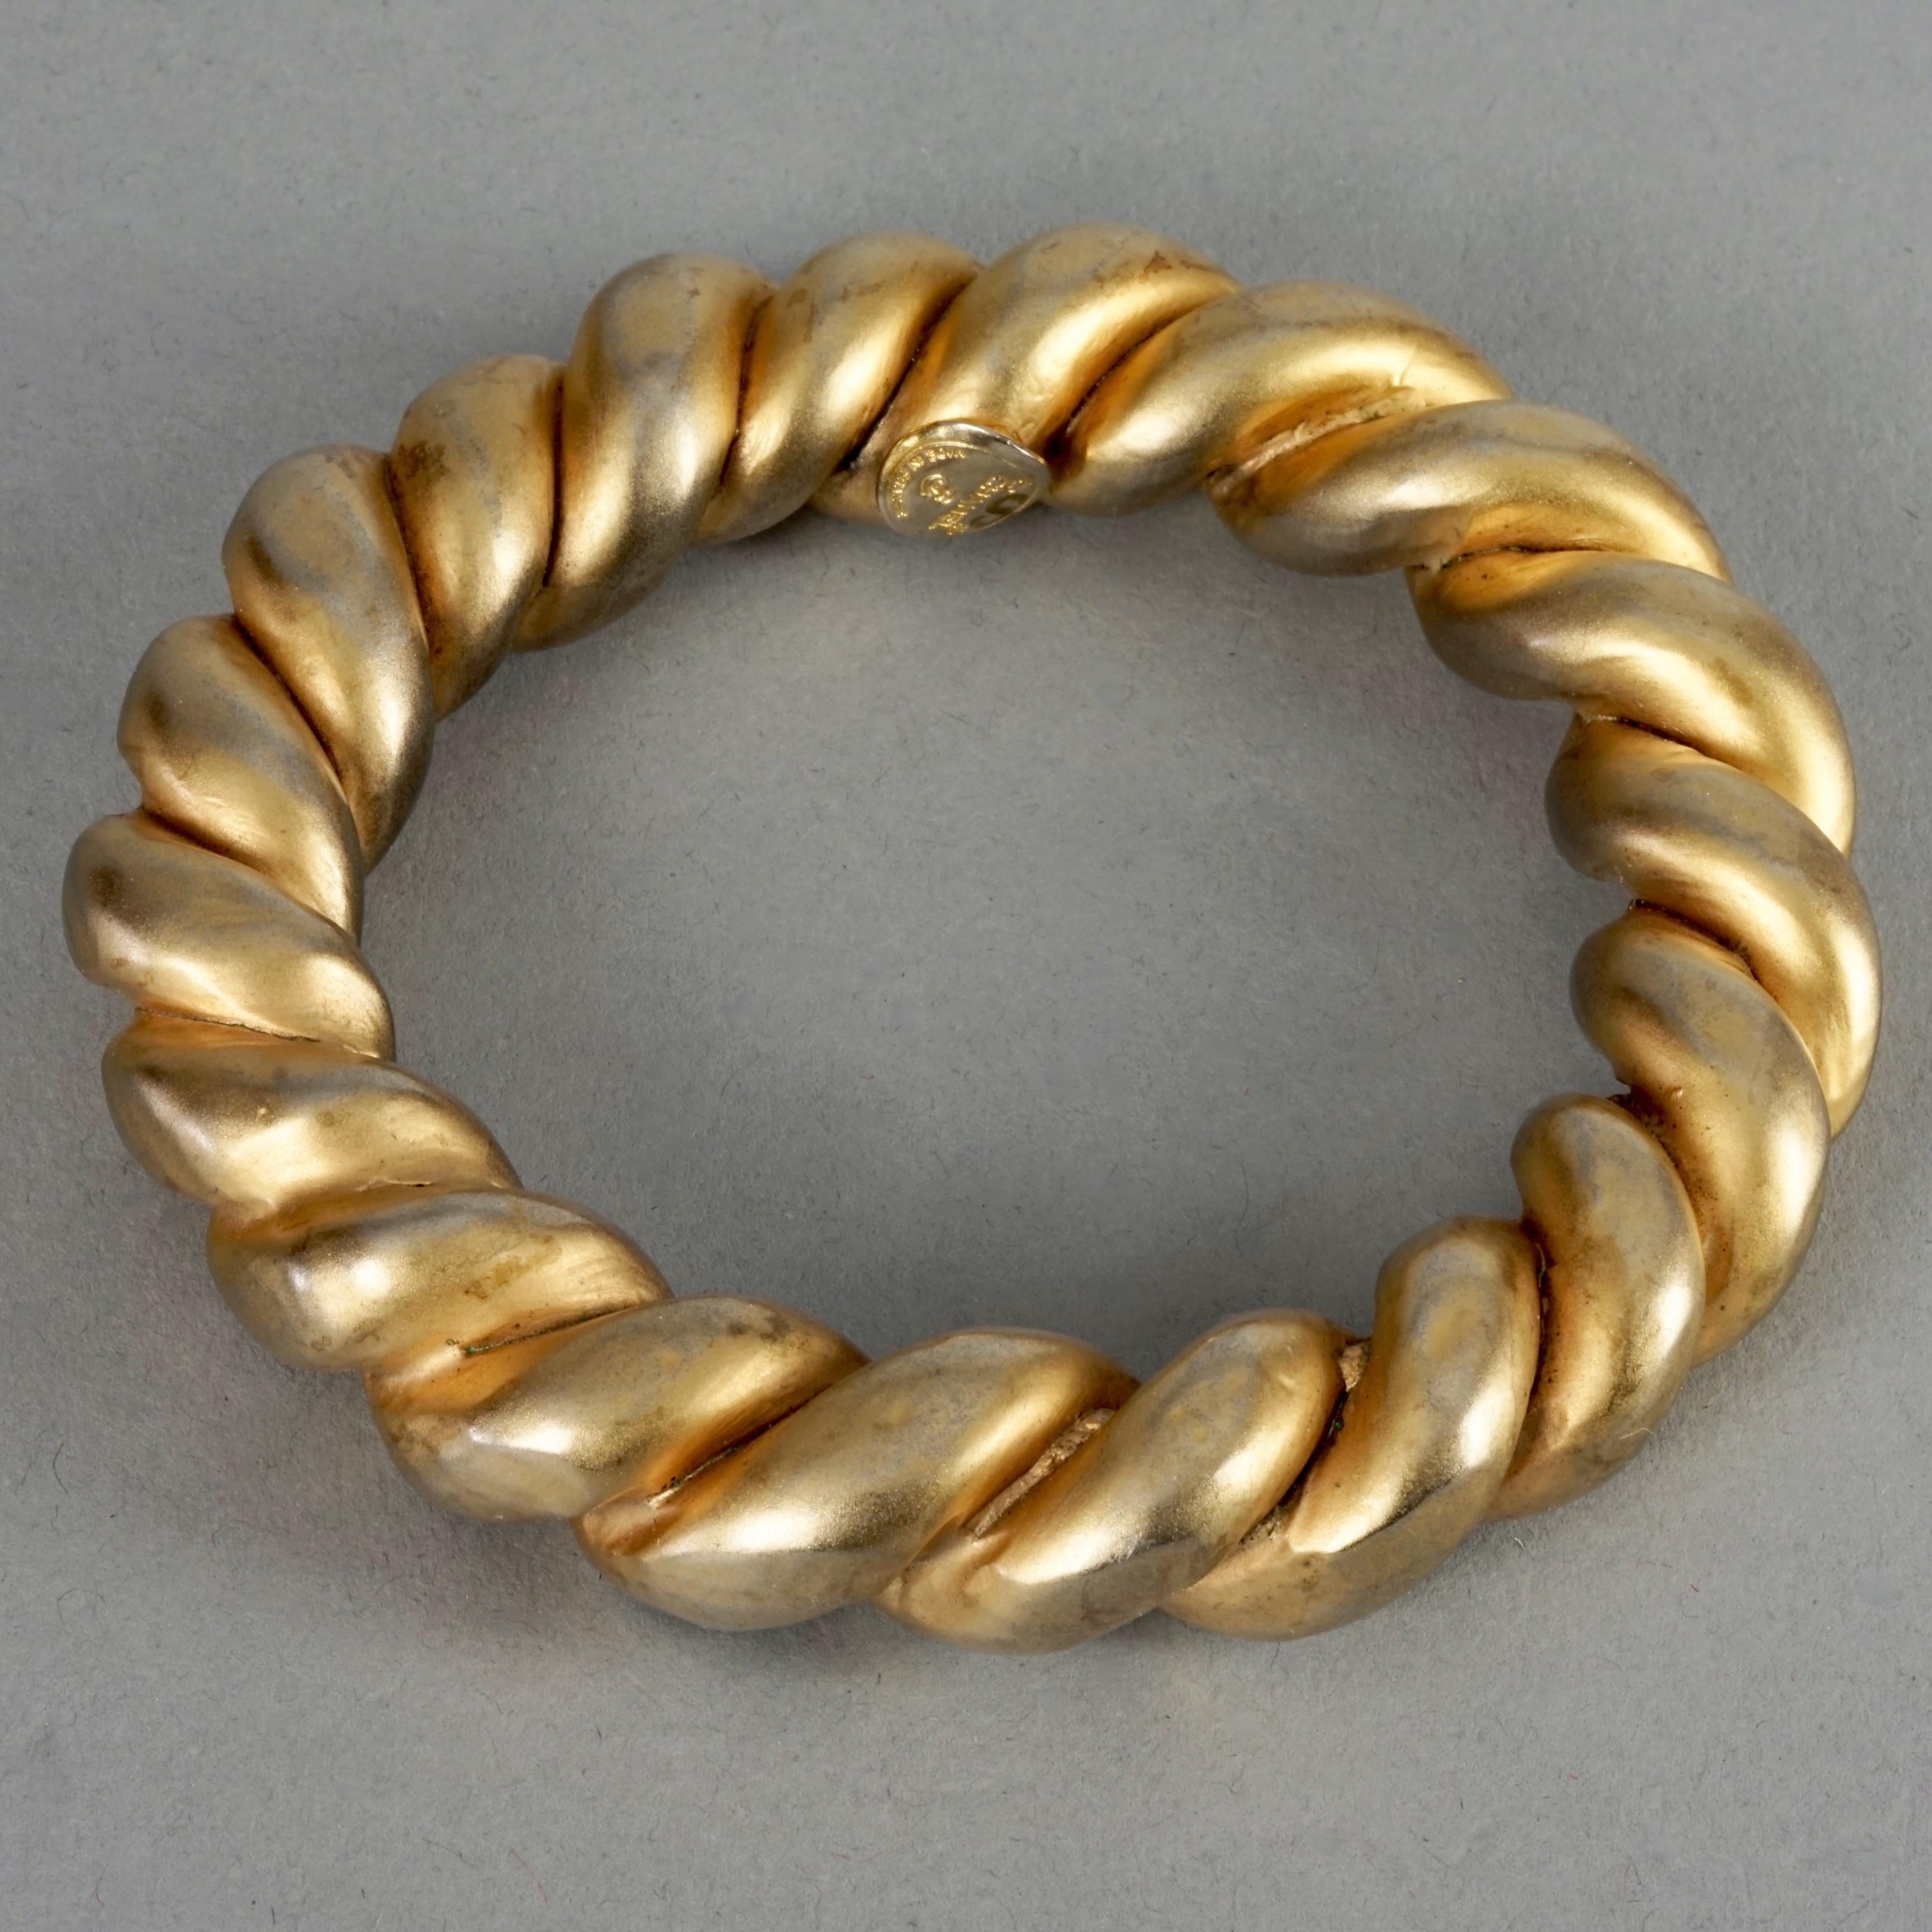 Vintage CHANEL by VICTOIRE de CASTELLANE Twisted Rope Bangle Bracelet In Good Condition For Sale In Kingersheim, Alsace